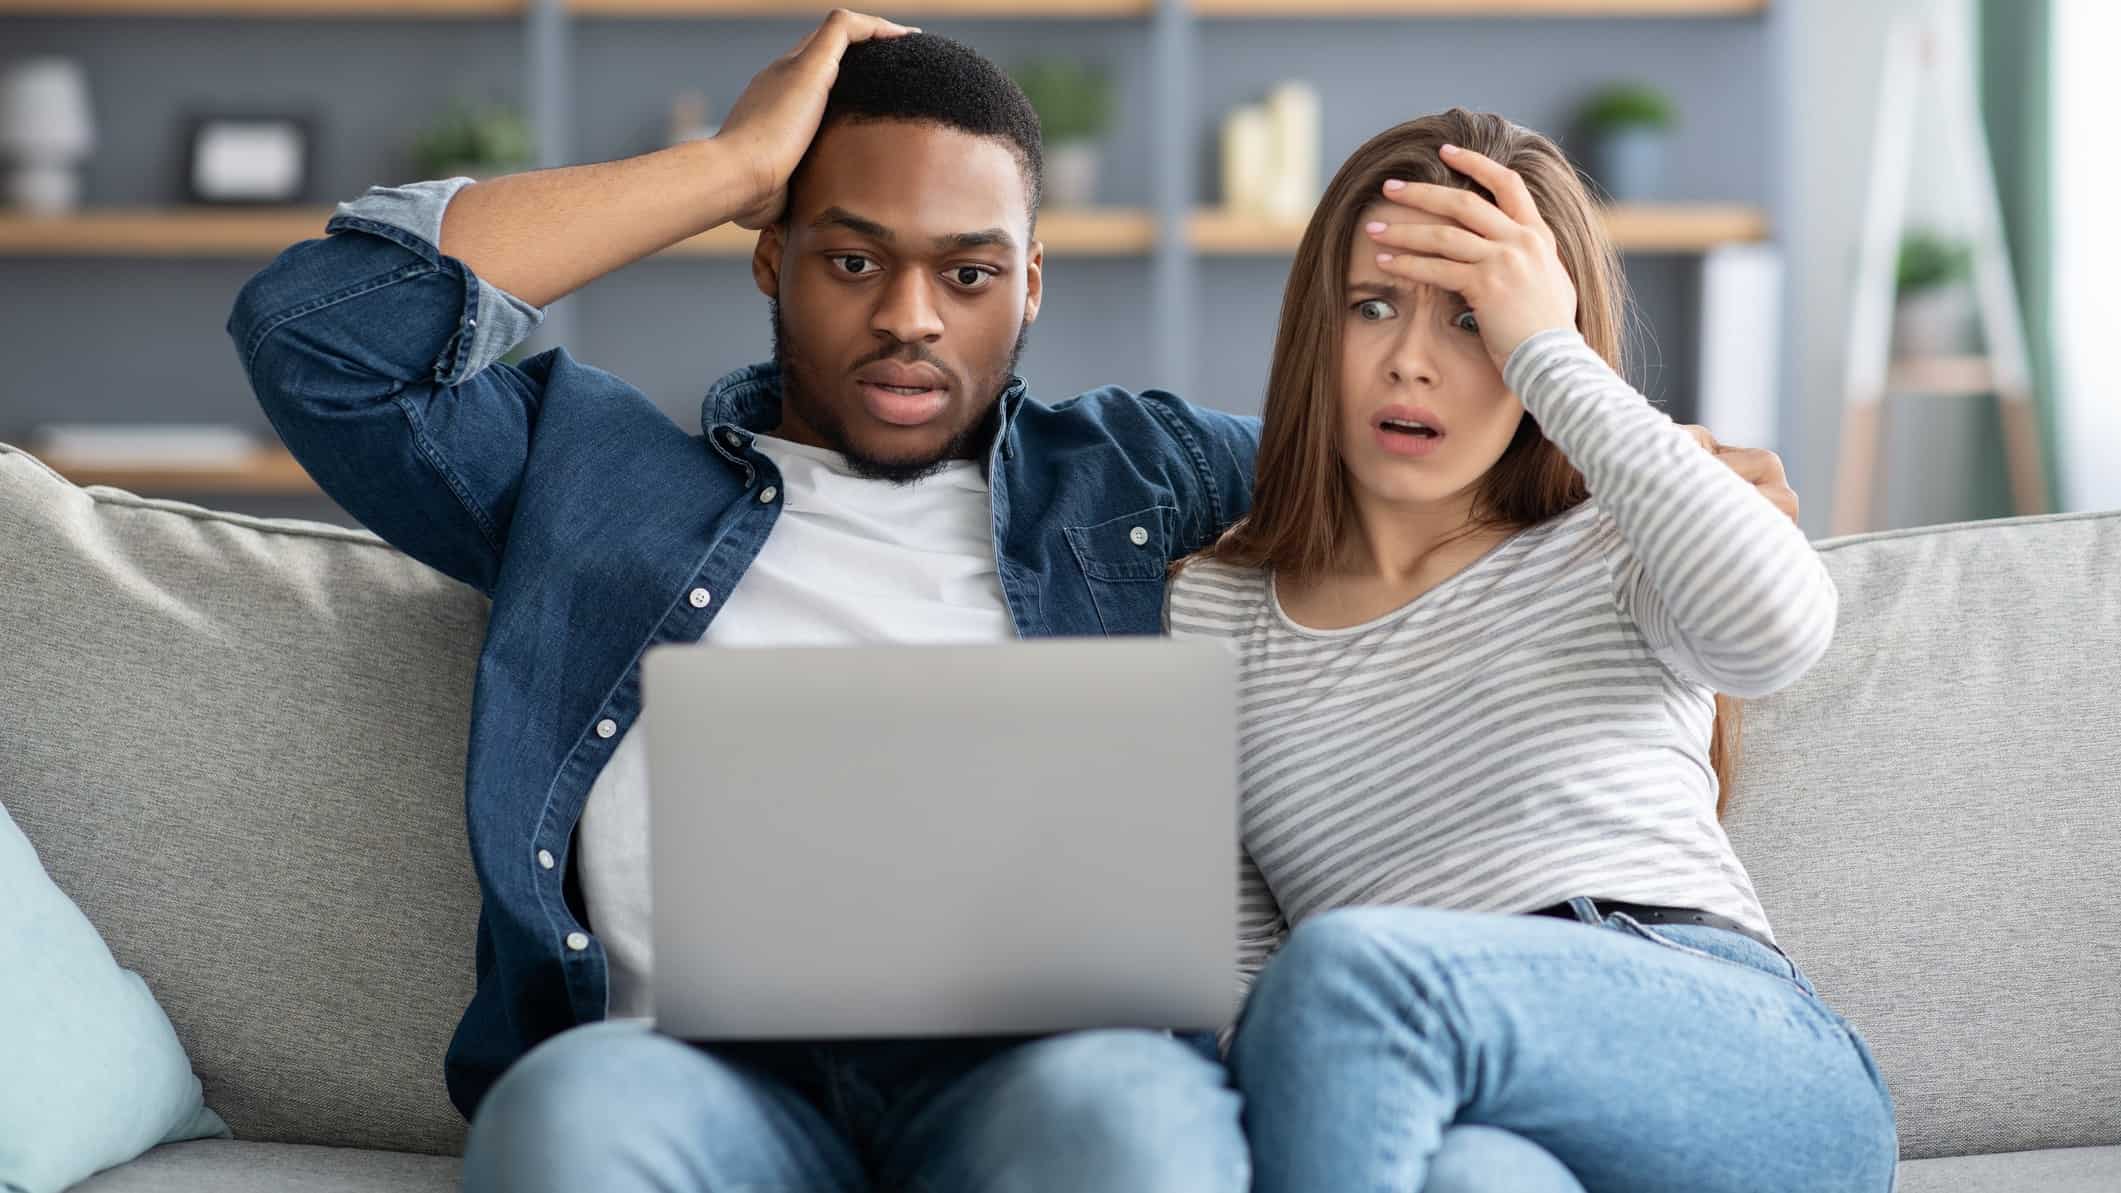 a couple sits on a sofa, each clutching their heads in horror and disbelief, while looking at the computer screen balanced on the lap of the man.